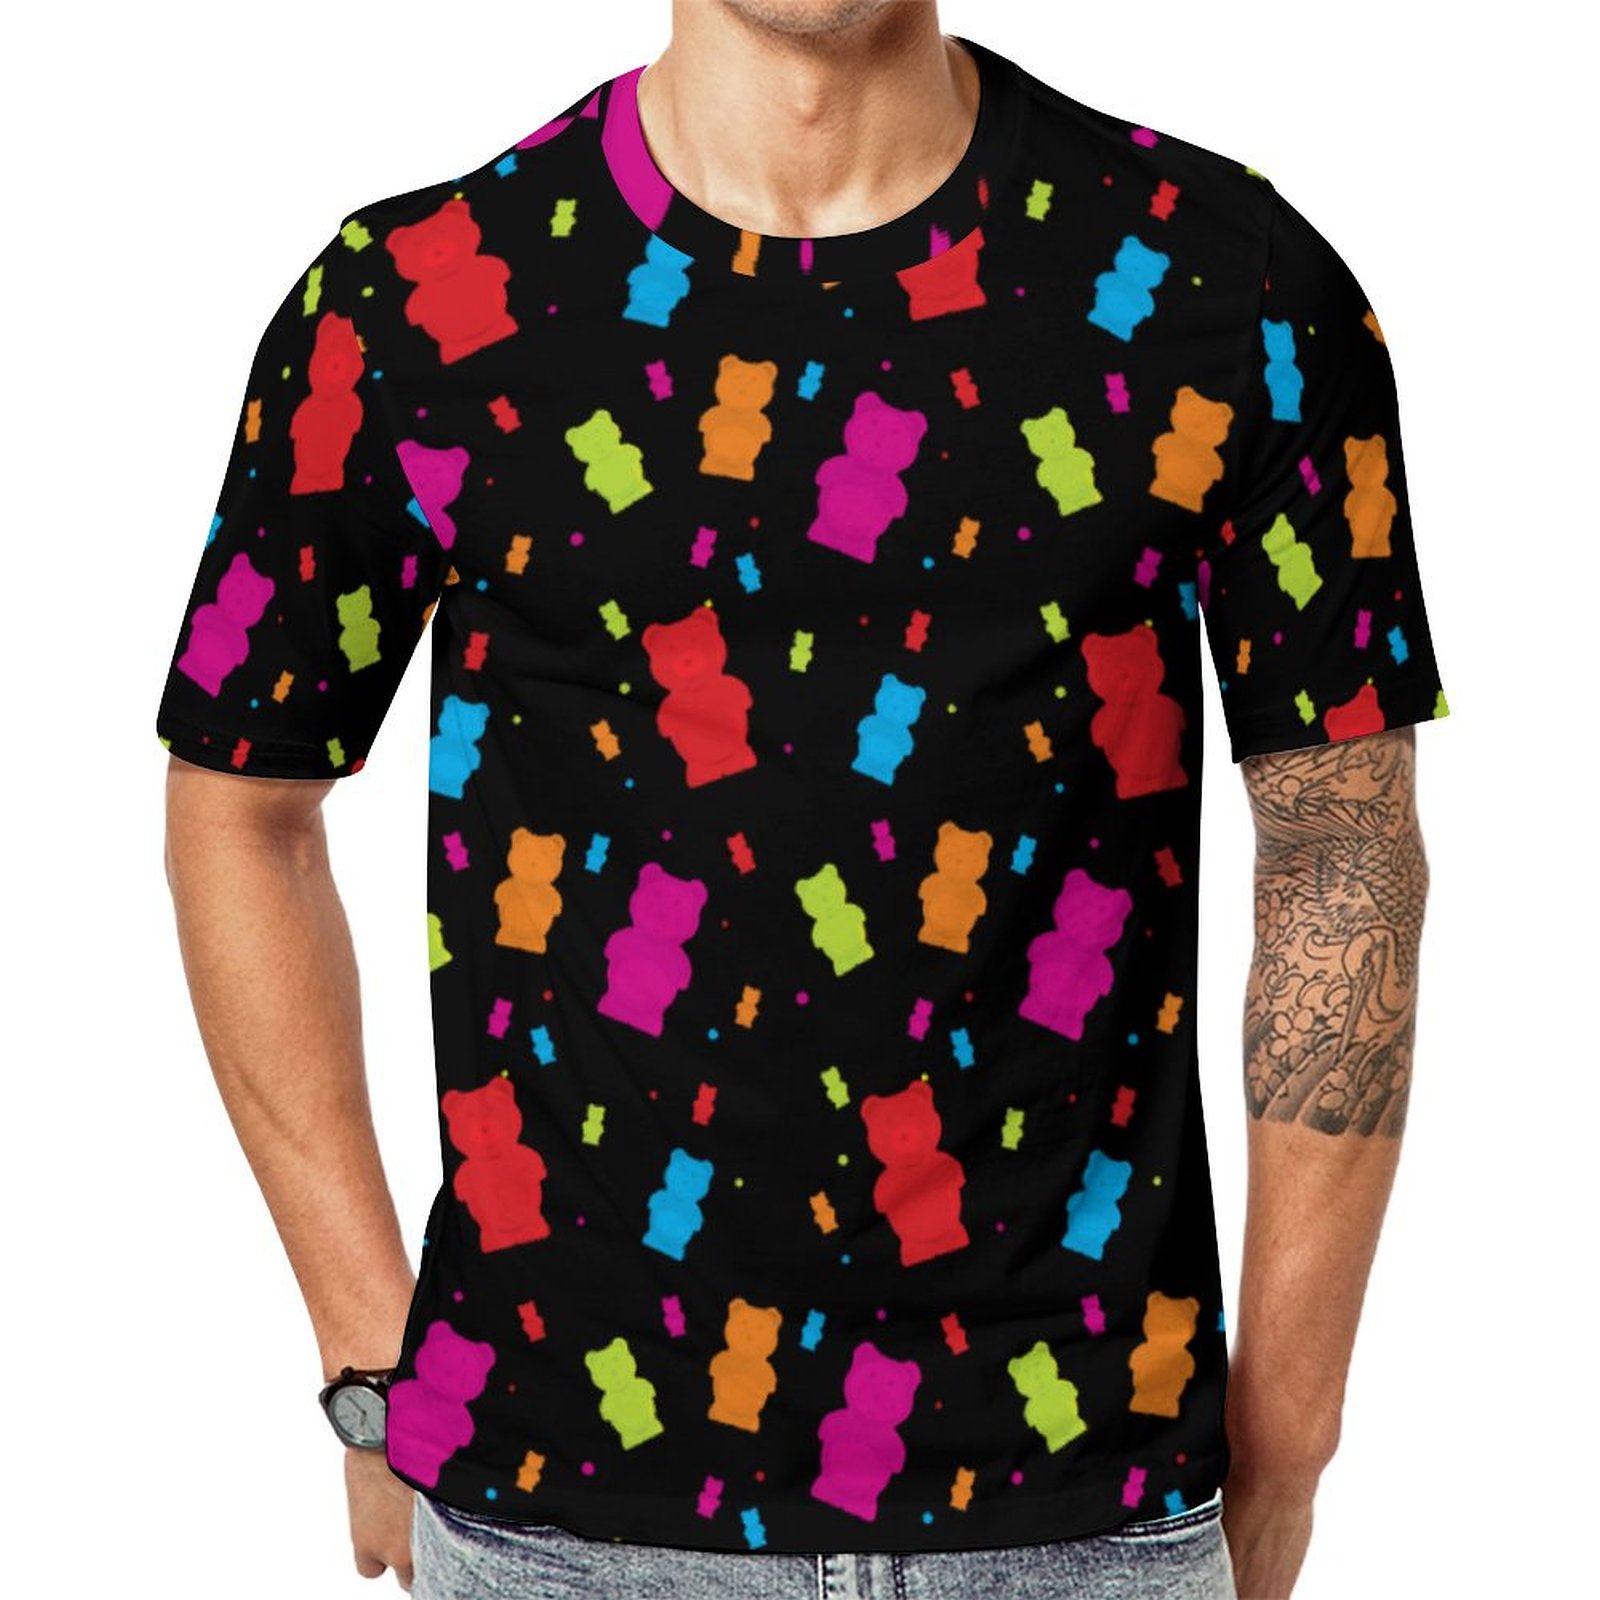 Illustrated Colorful Gummy Bear Candy Short Sleeve Print Unisex Tshirt Summer Casual Tees for Men and Women Coolcoshirts